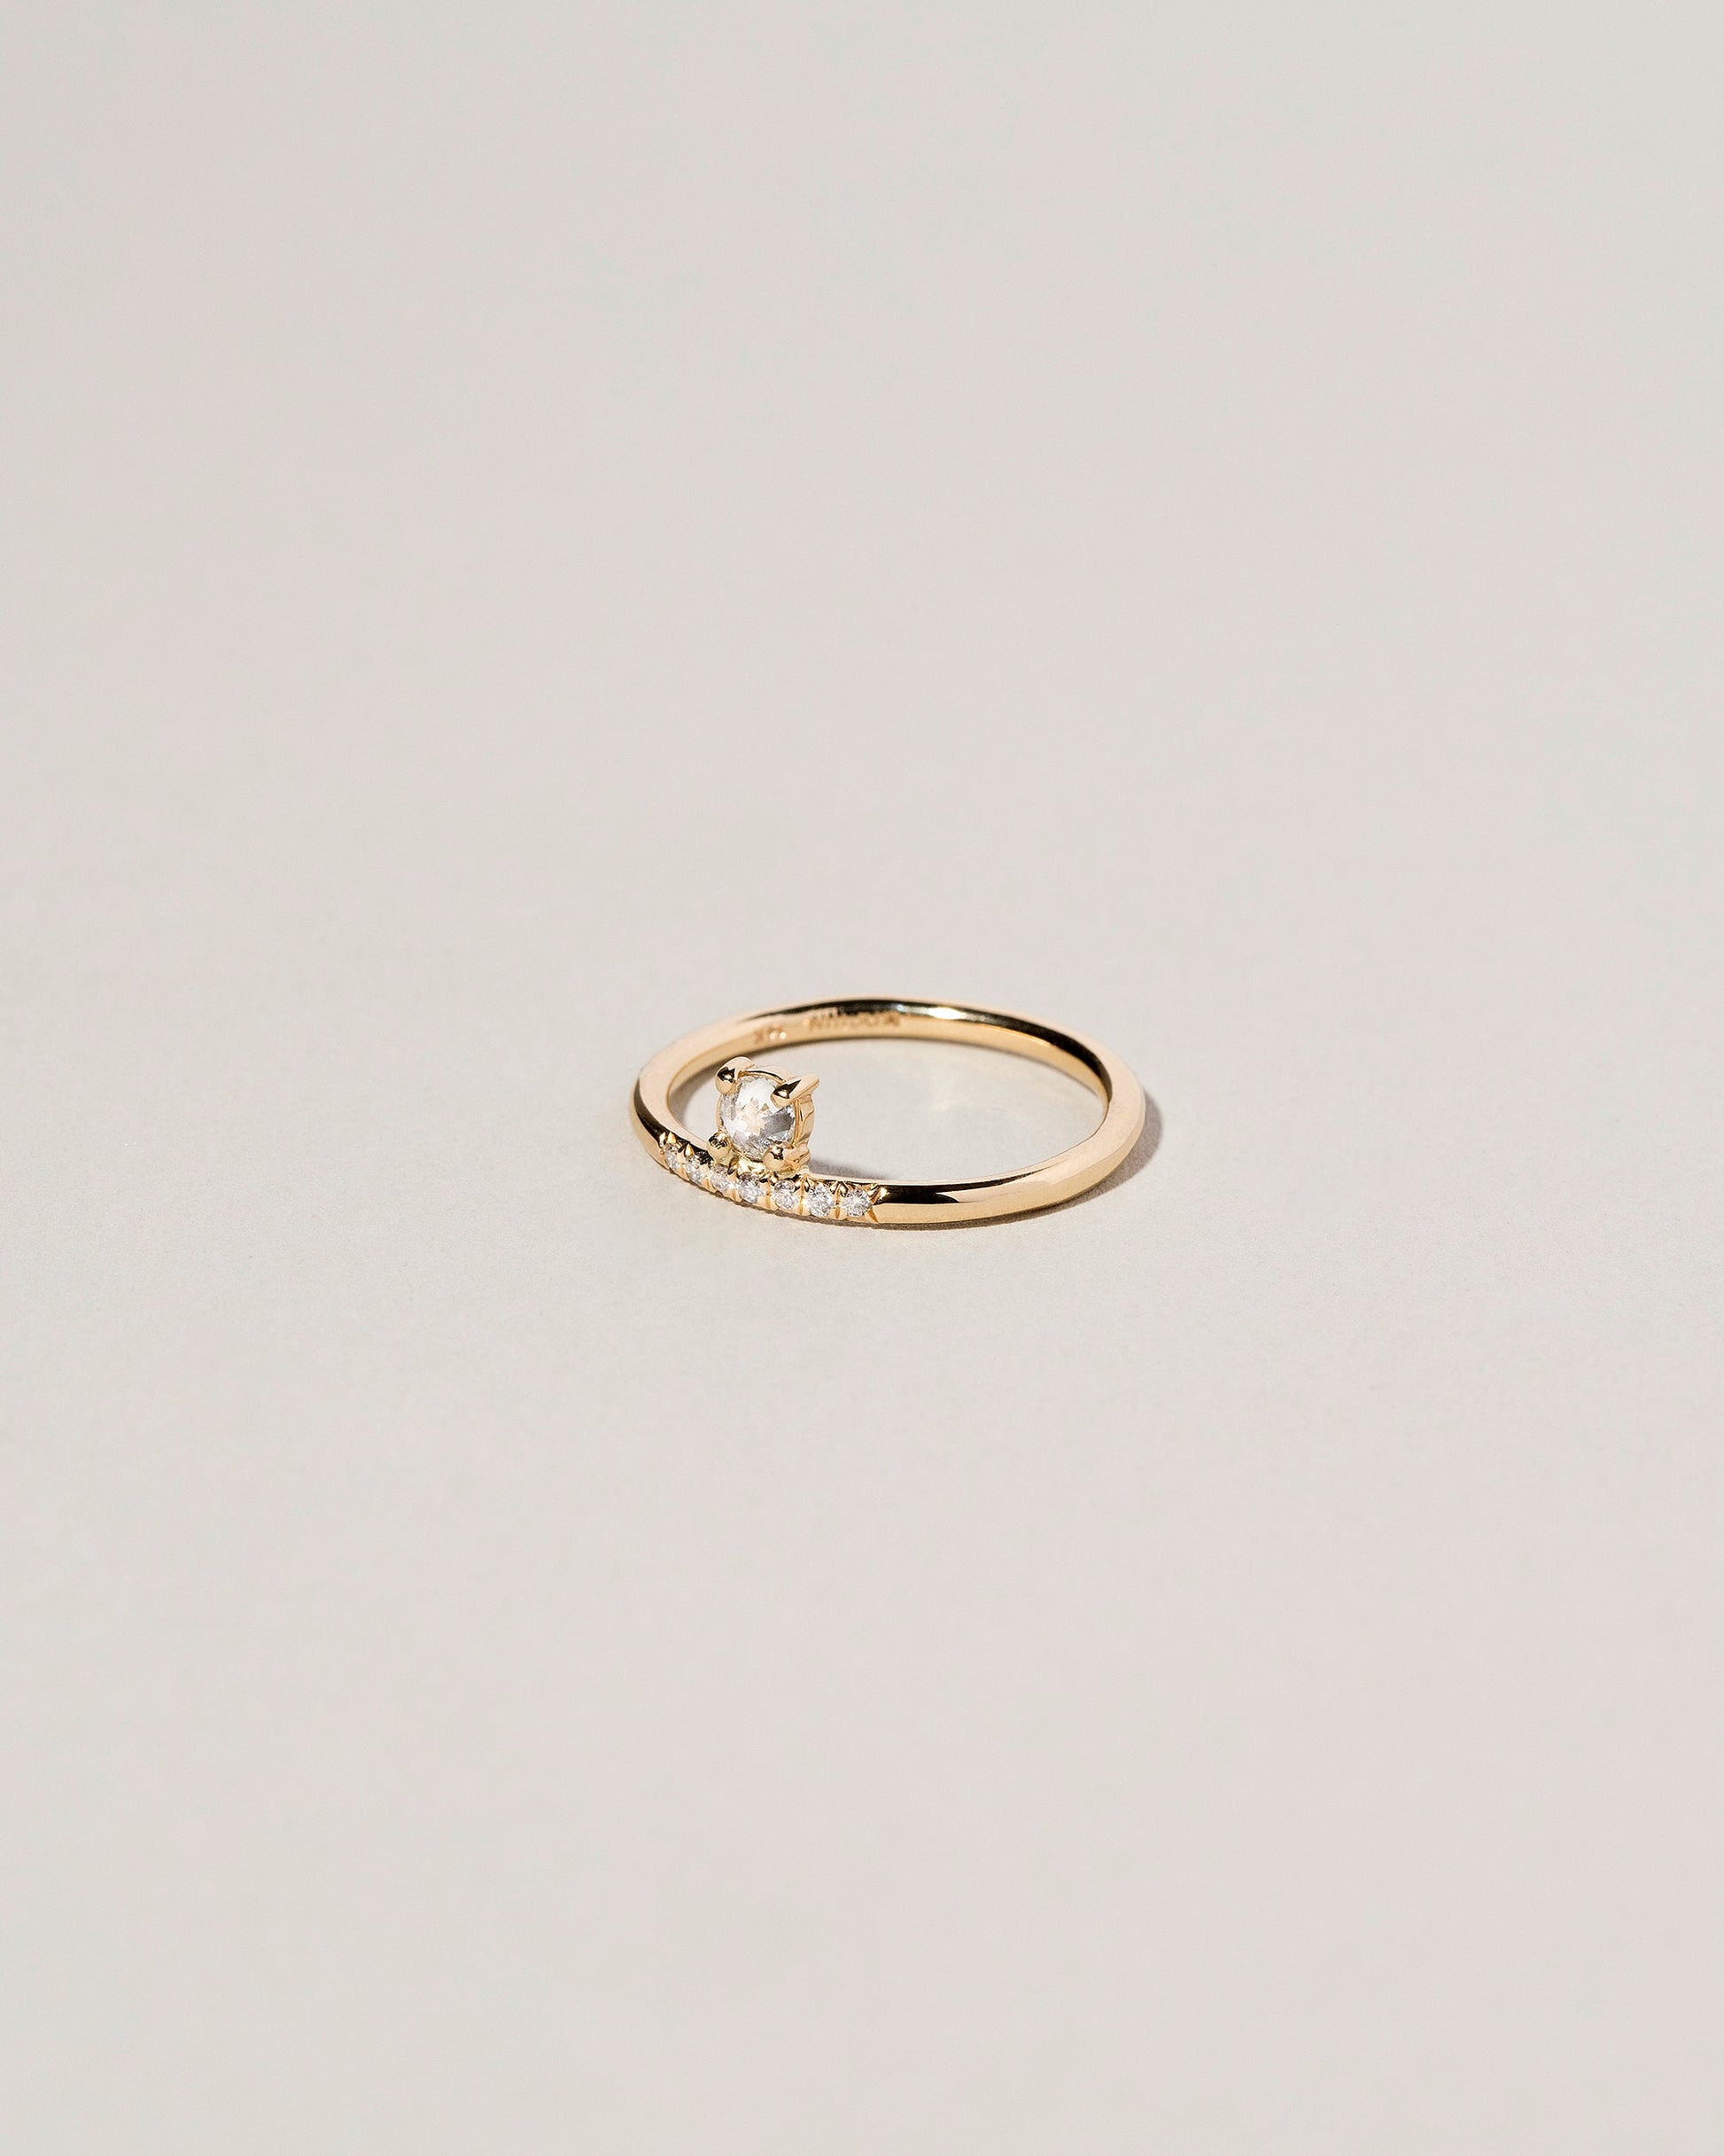  Stacked Ring - White Diamond on light color background.